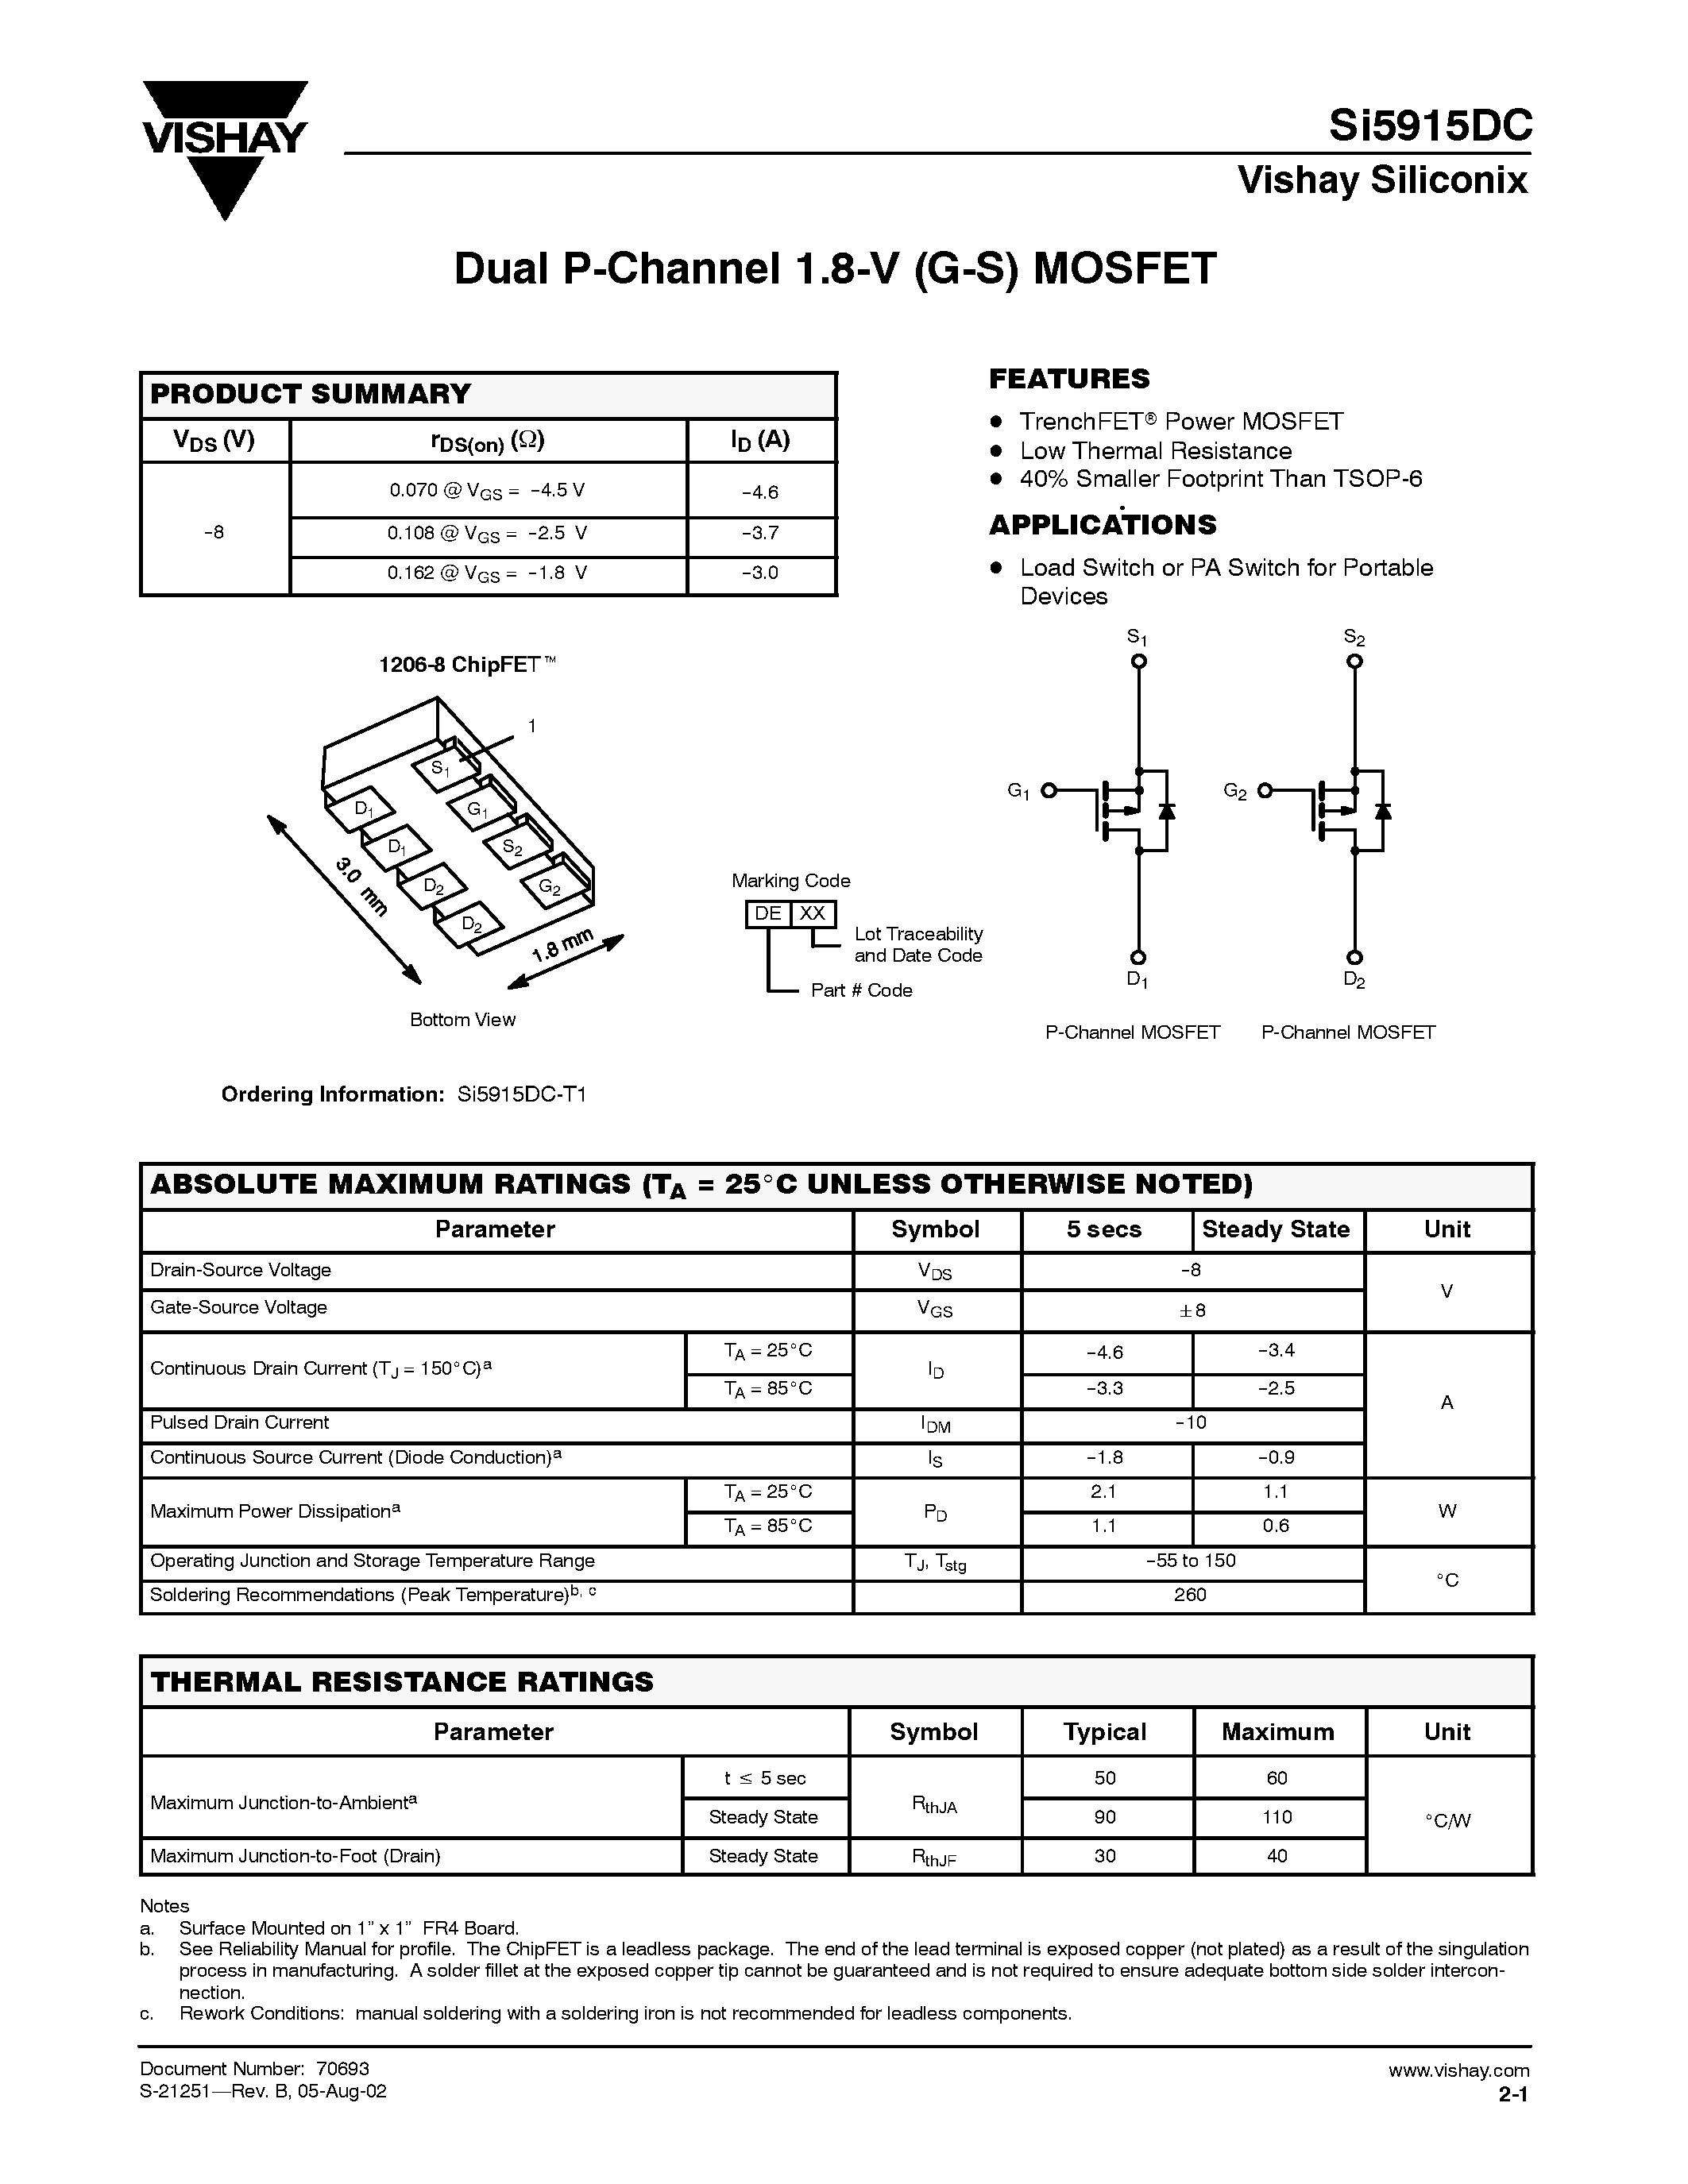 Datasheet SI5915DC-T1 - Dual P-Channel 1.8-V (G-S) MOSFET page 1